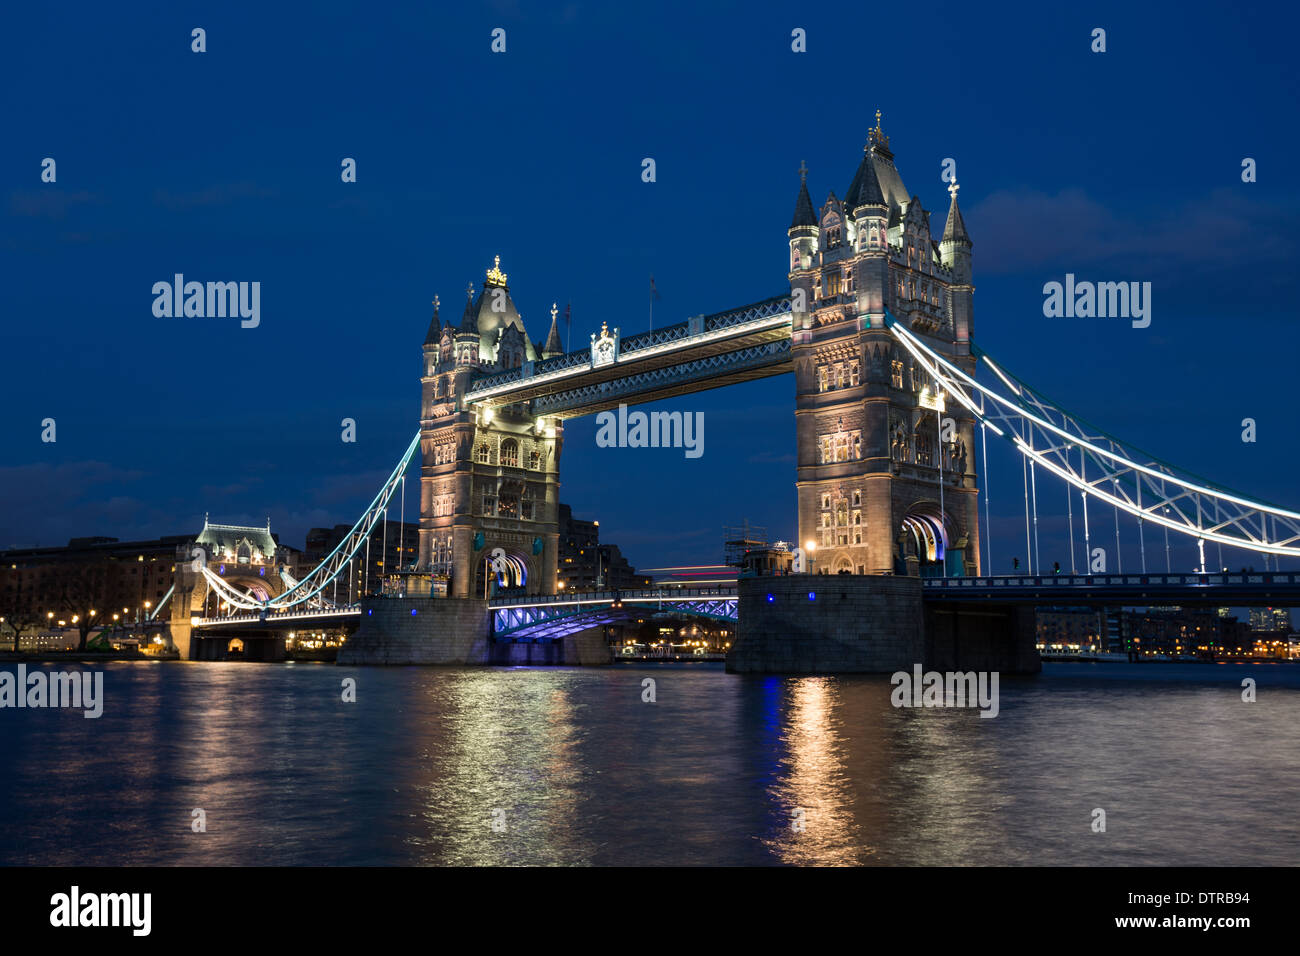 Tower Bridge, a combined bascule and suspension bridge in London which crosses the River Thames. Stock Photo